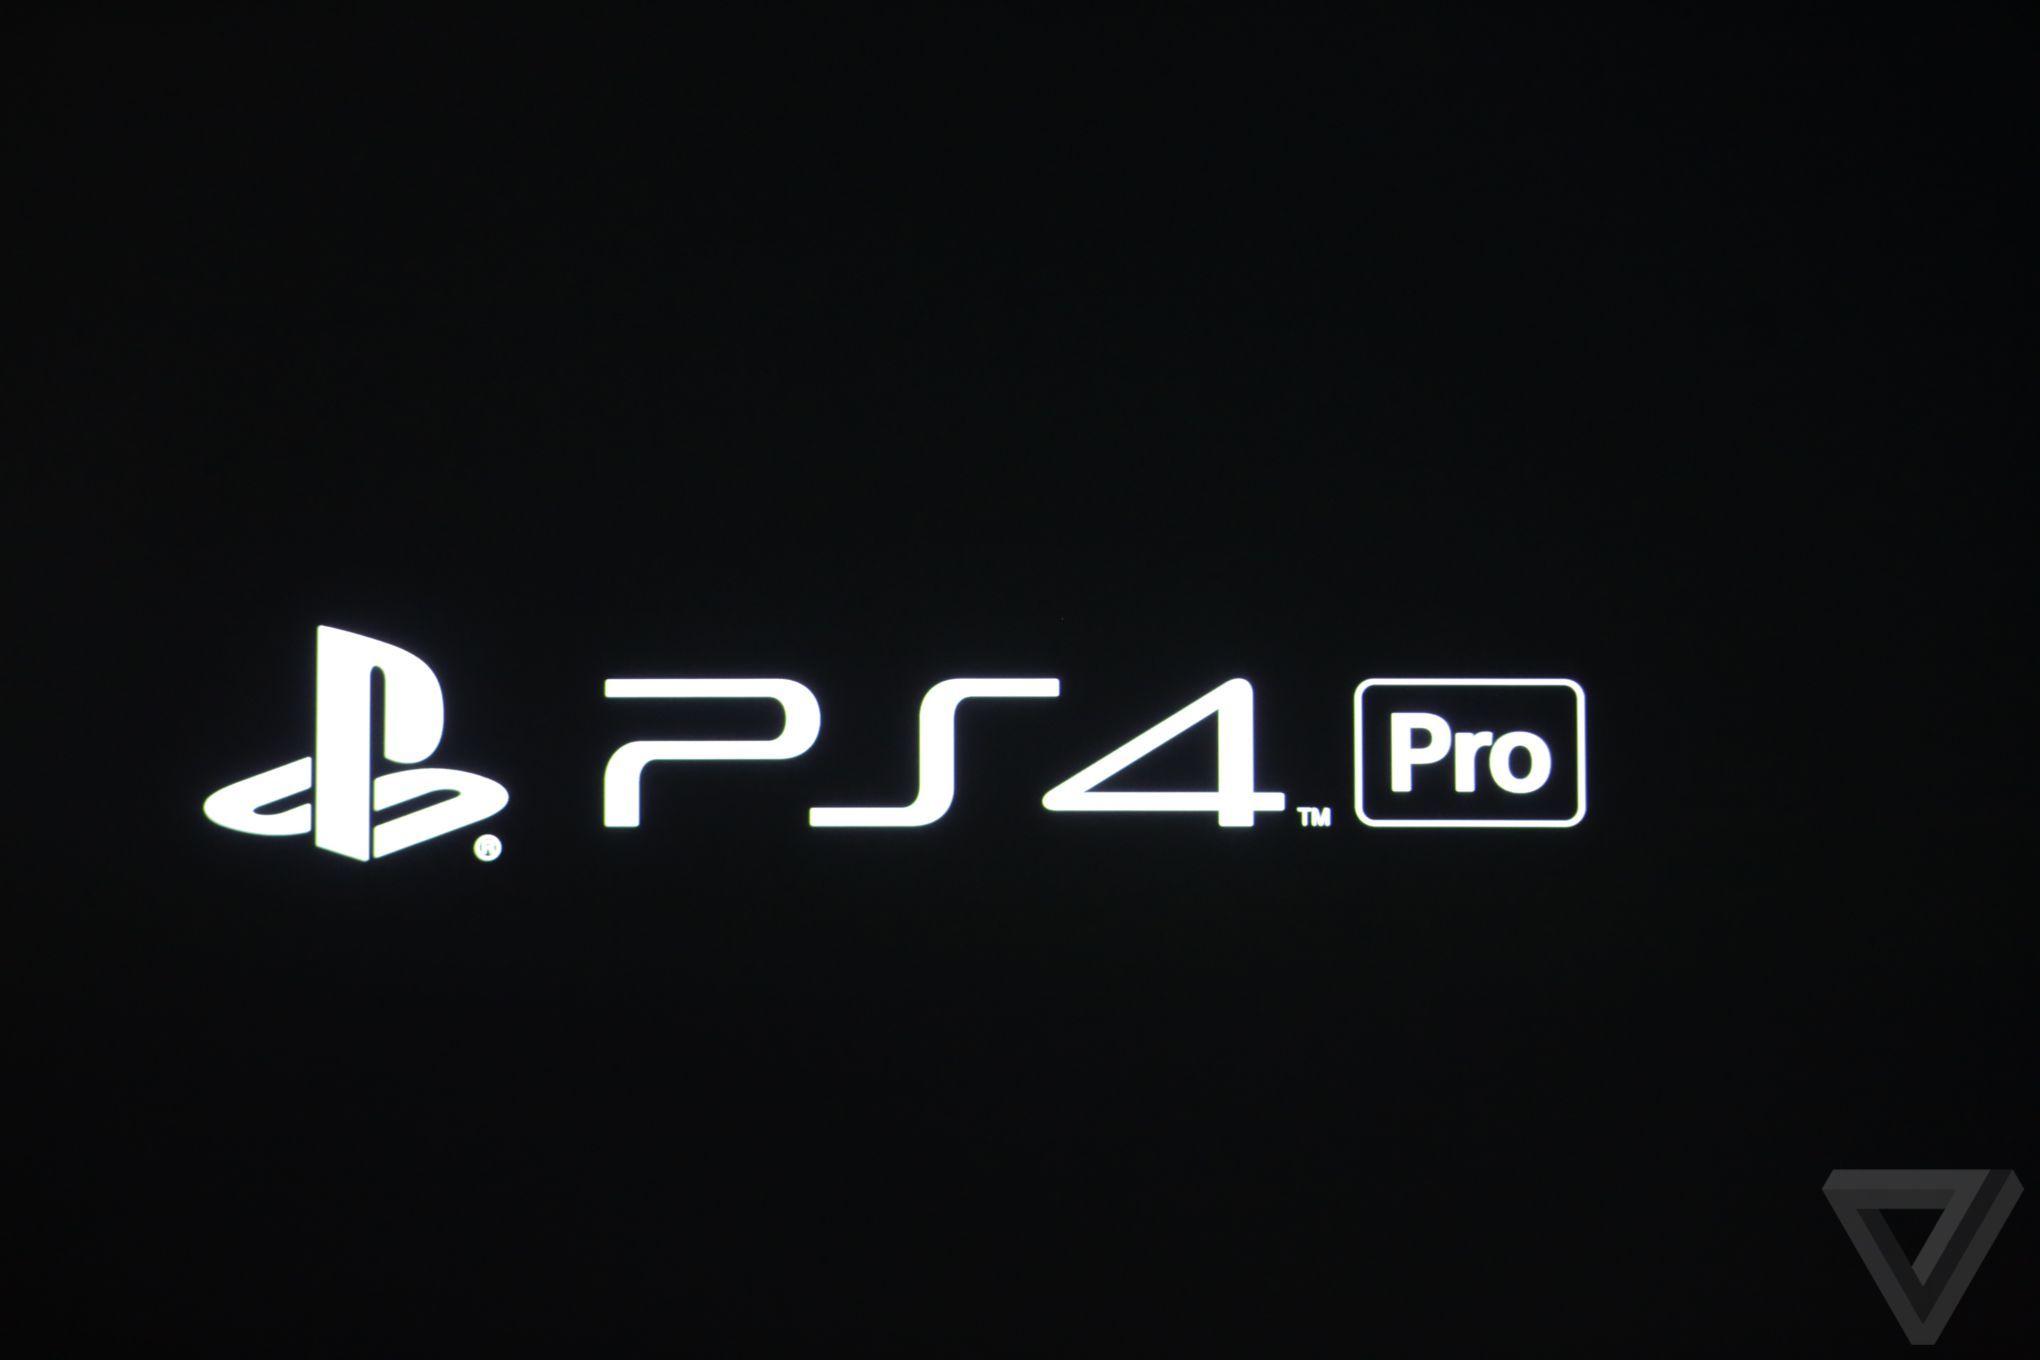 Sony PlayStation 4 Logo - Sony announces PlayStation 4 Pro with 4K HDR gaming for $399